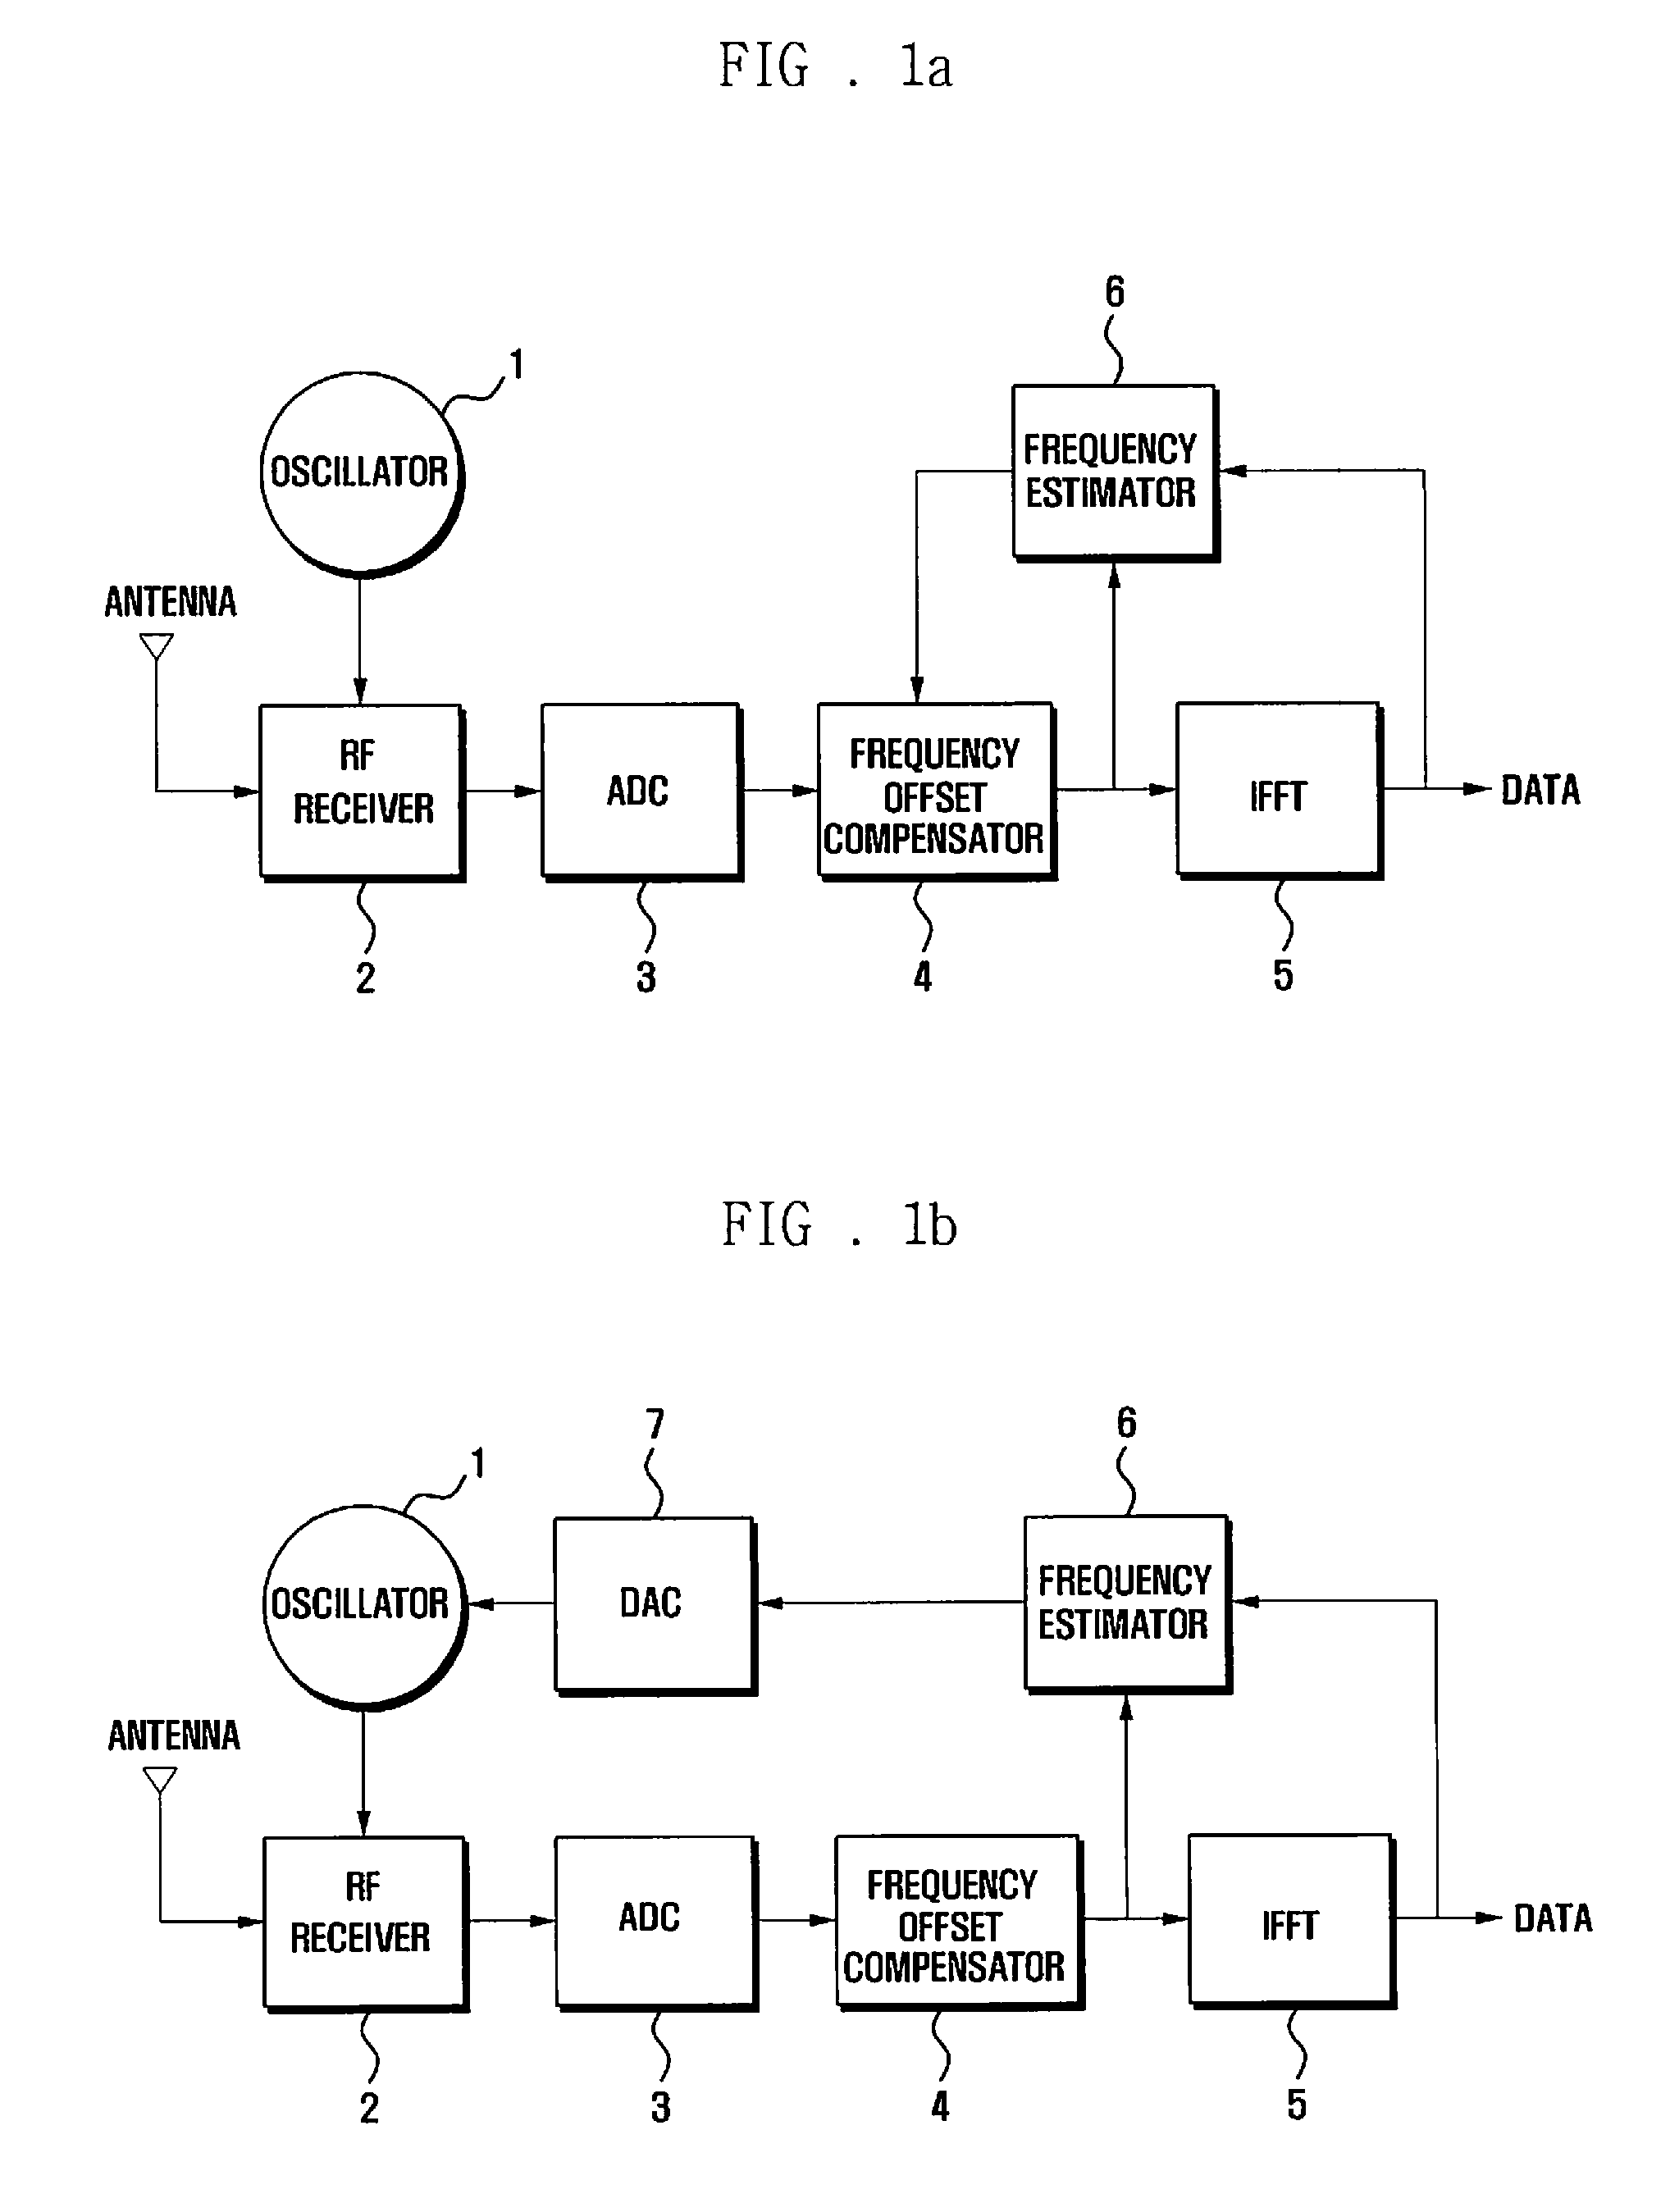 Carrier frequency estimation method and apparatus in wireless communication system